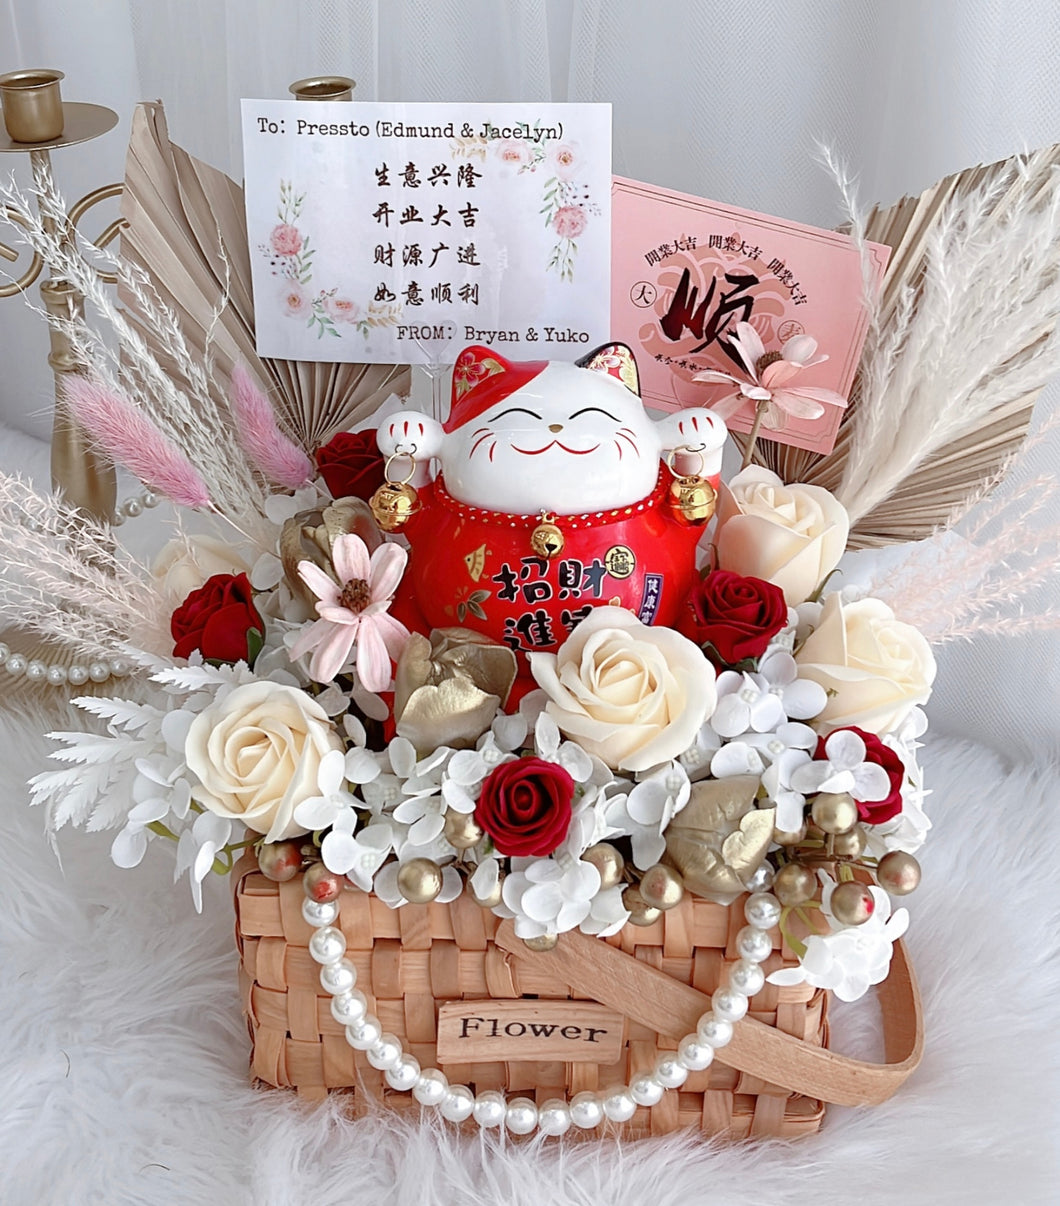 Opening Soap Flower Basket with Fortune Cat 招财猫开业花篮